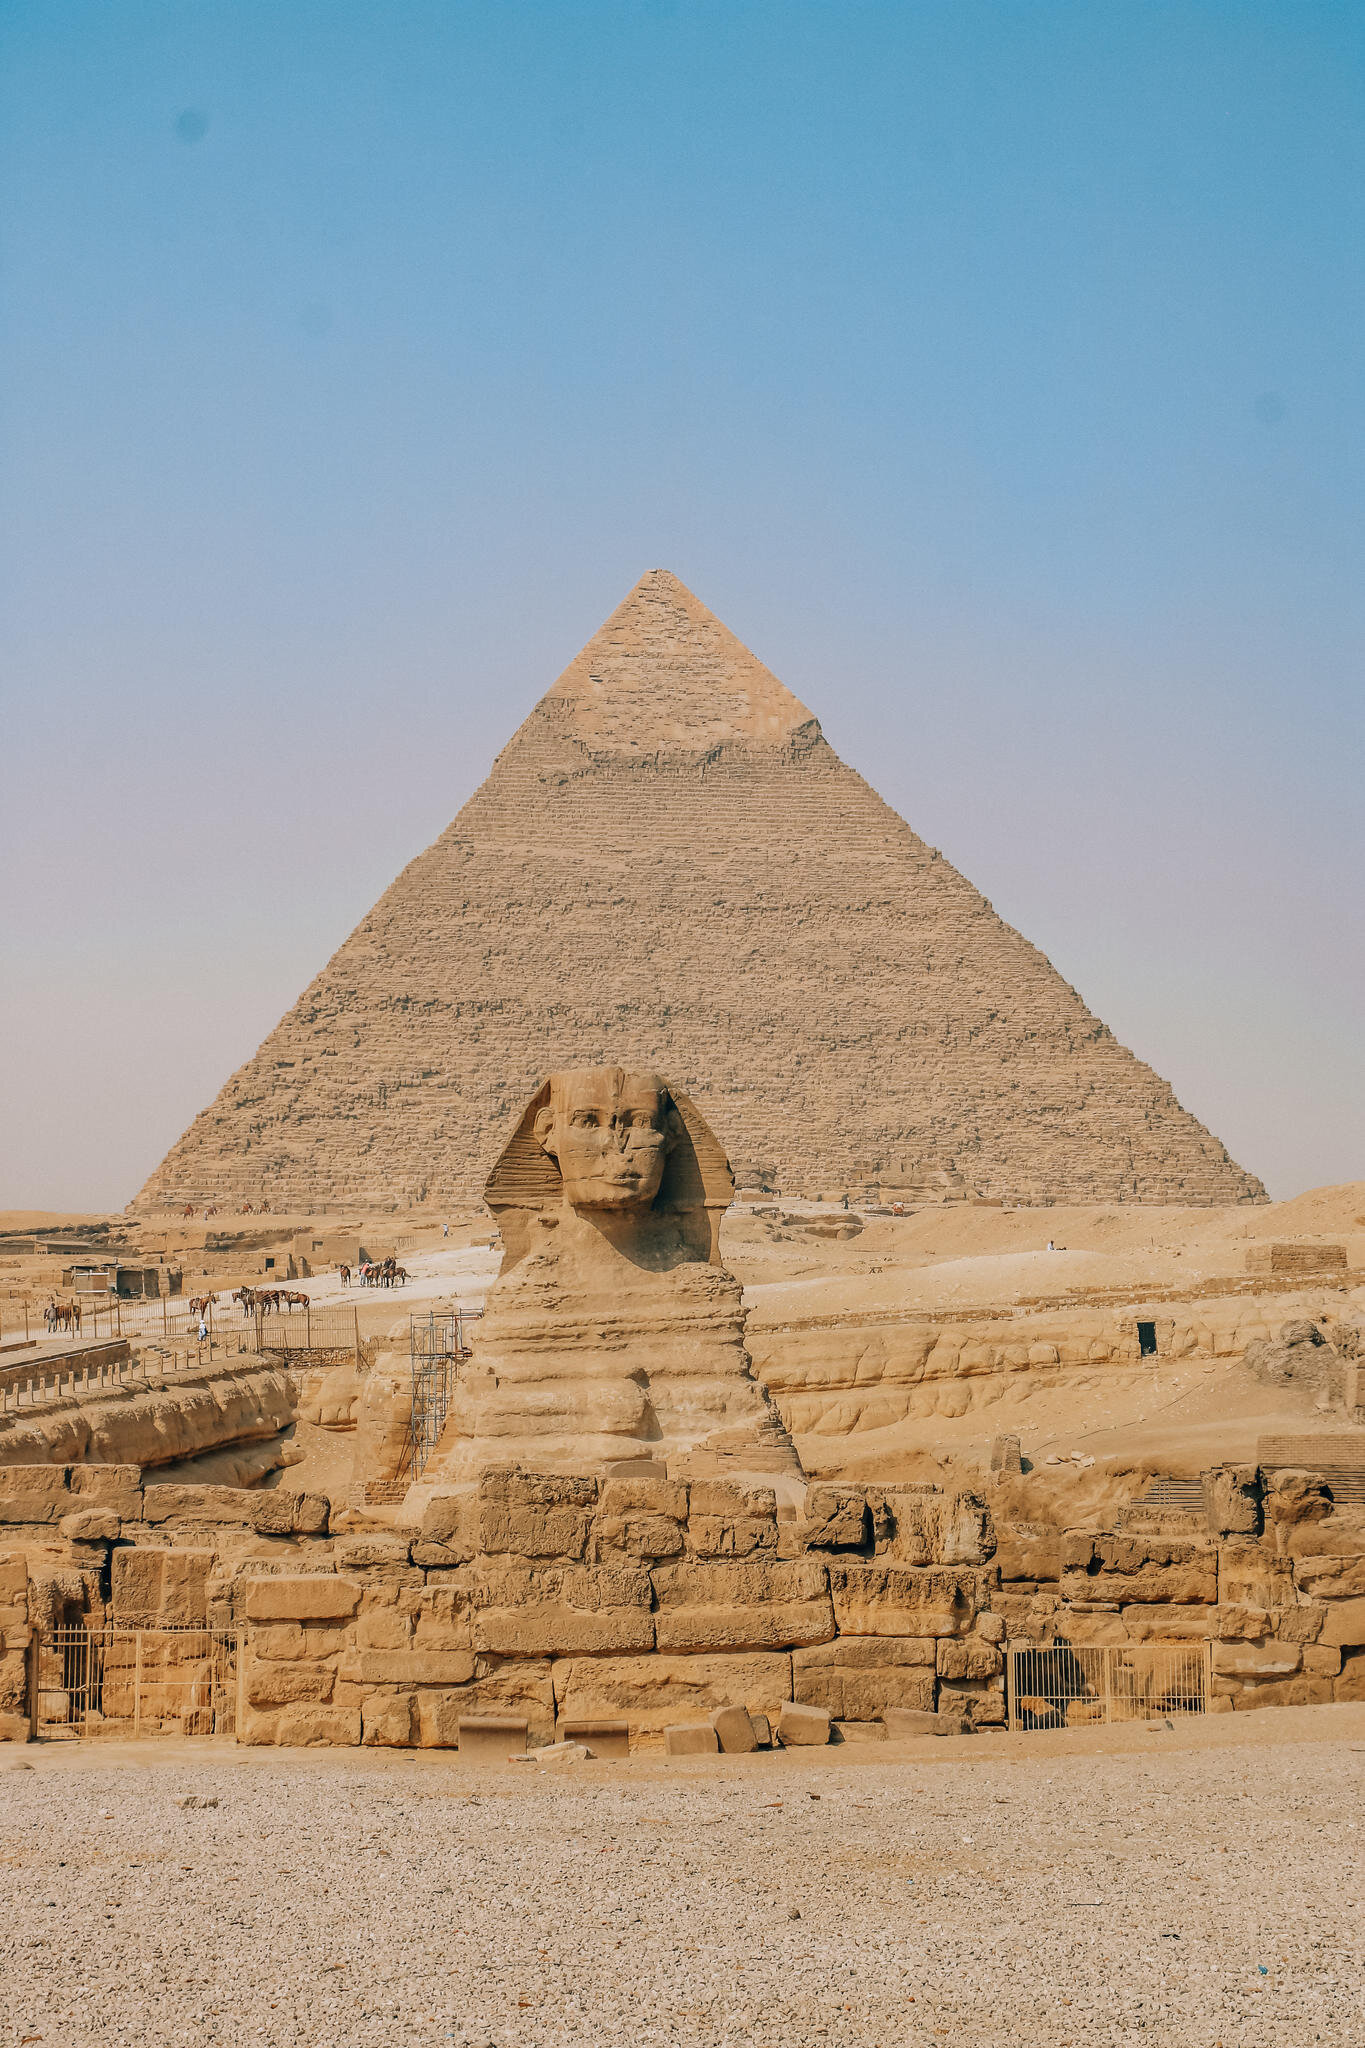 Sphinx and pyramid in cairo egypt